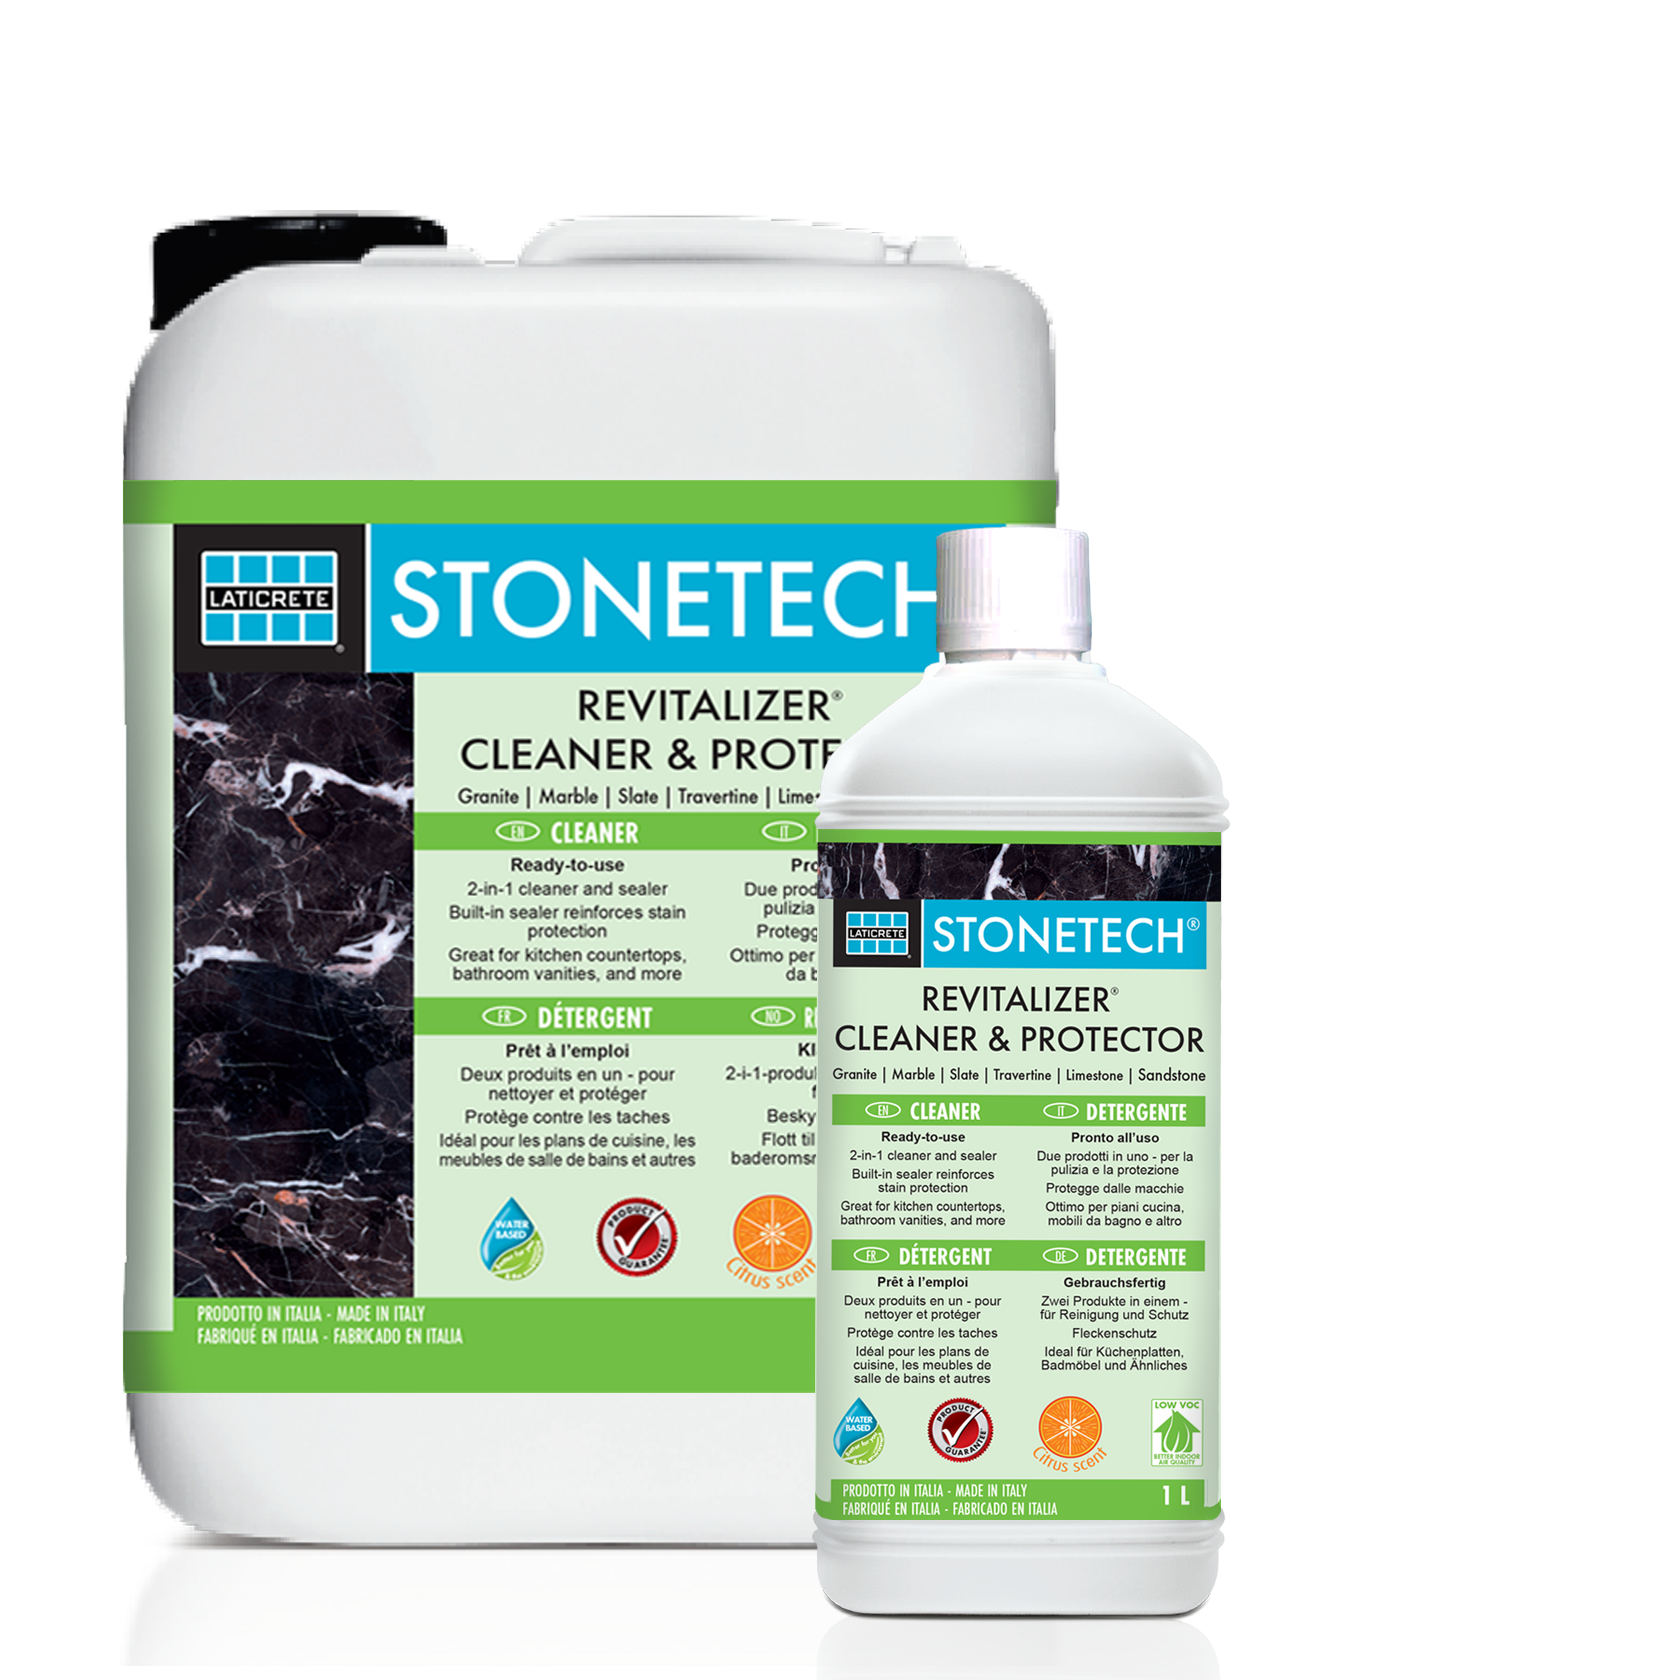 STONETECH® REVITALIZER® CLEANER & PROTECTOR